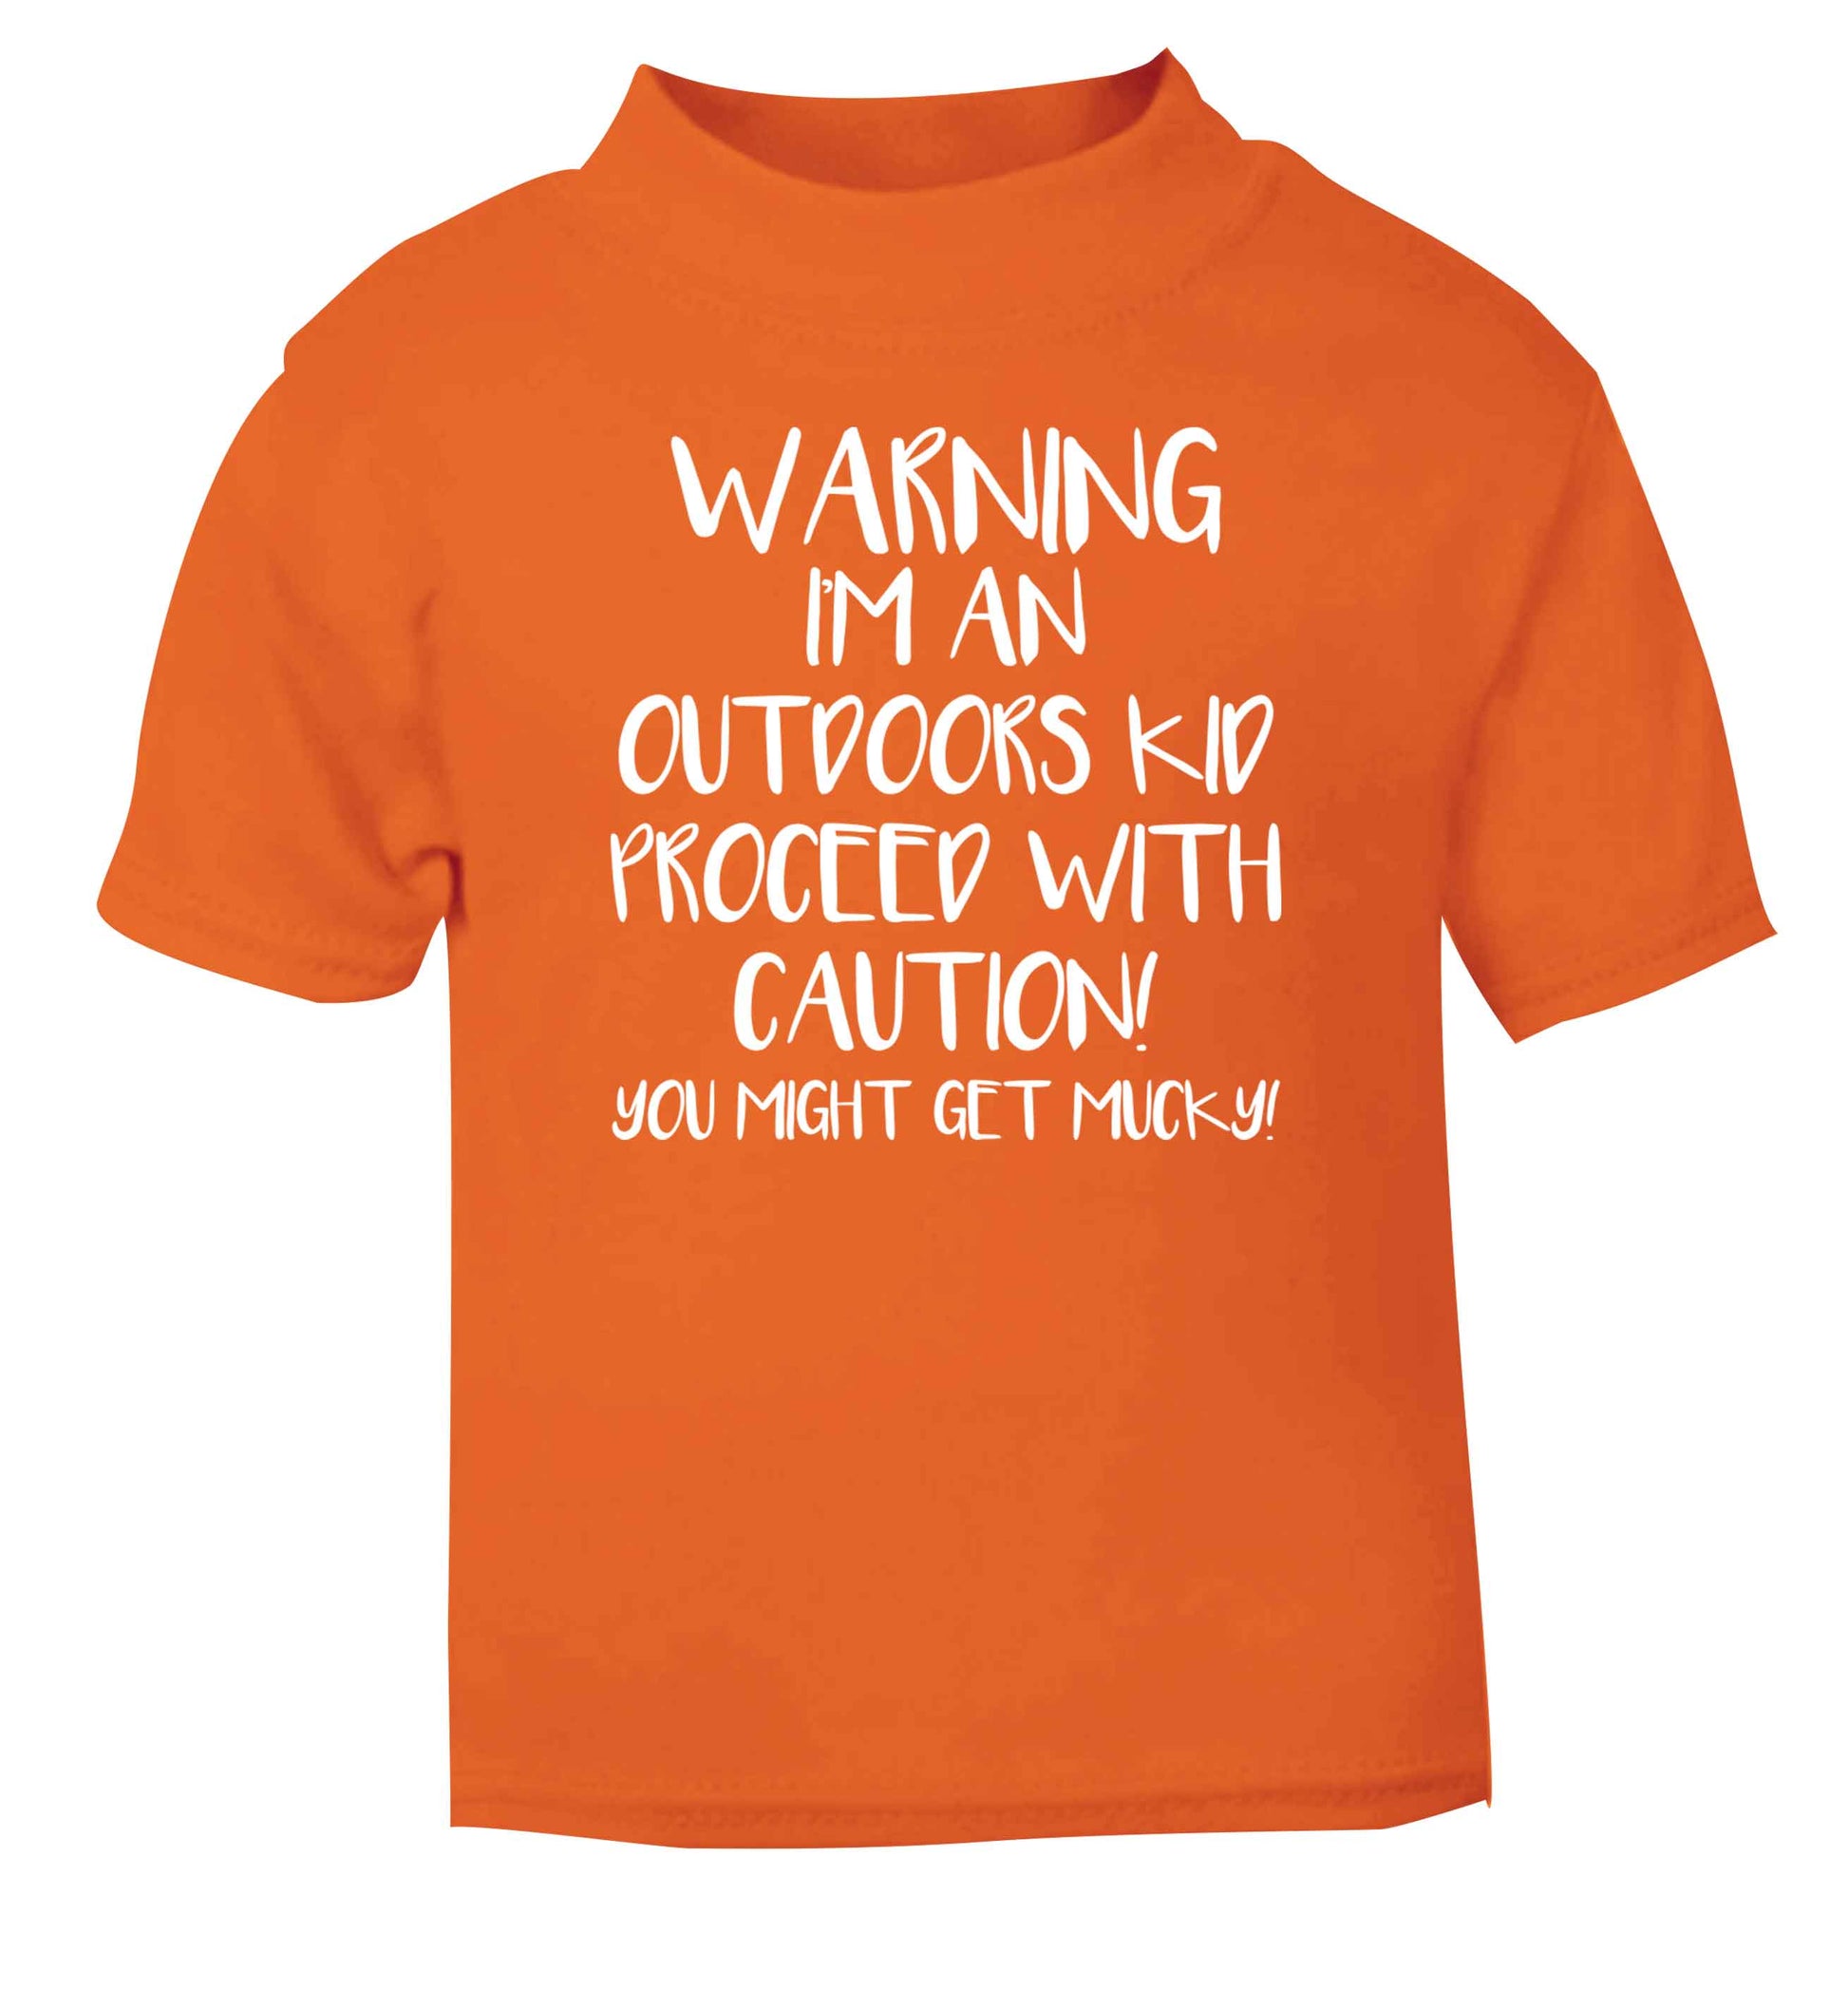 Warning I'm an outdoors kid! Proceed with caution you might get mucky orange Baby Toddler Tshirt 2 Years